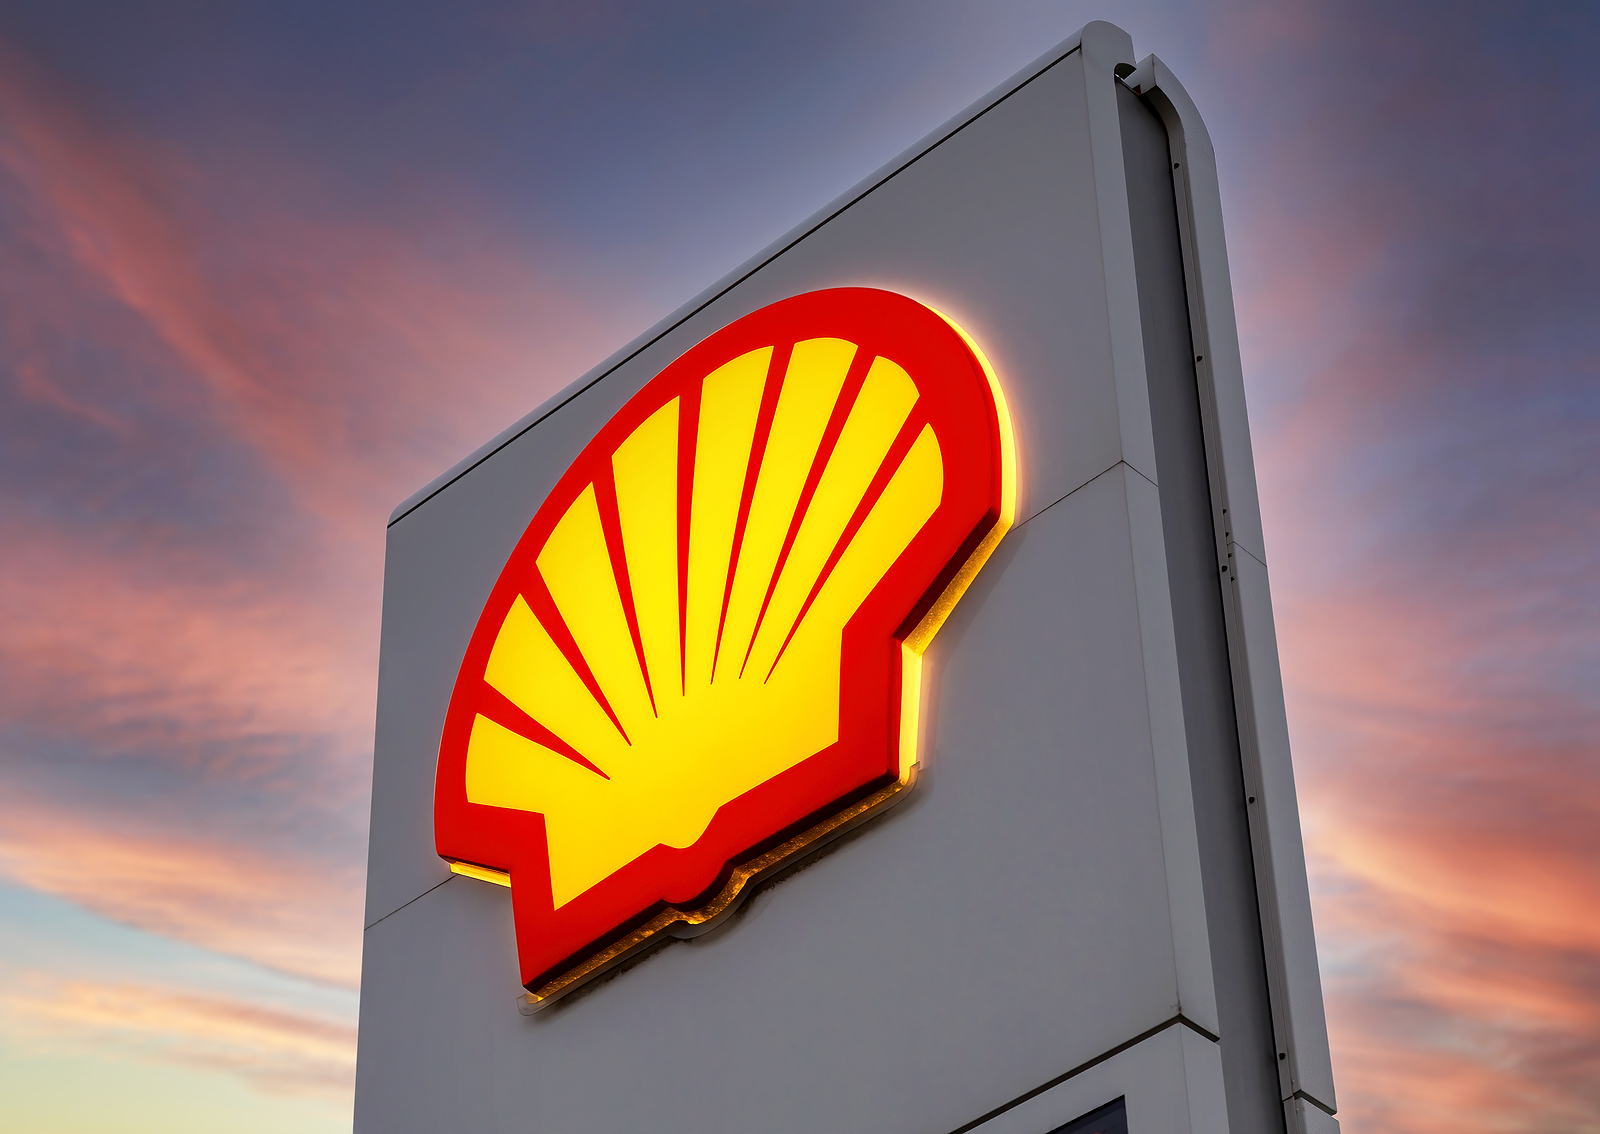 shell-confirms-moveit-related-breach-after-ransomware-group-leaks-data